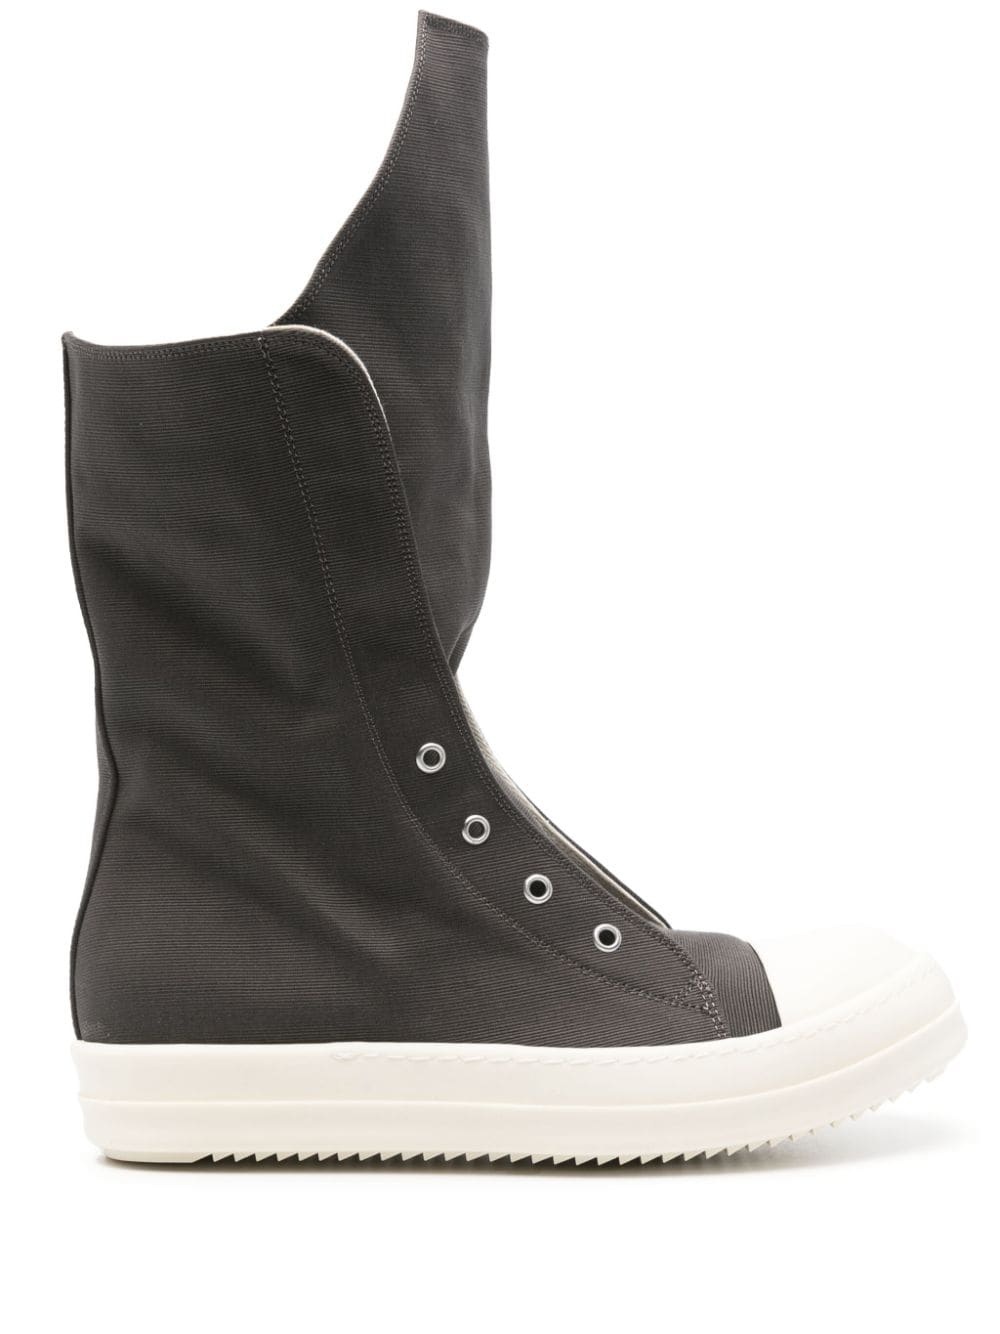 oversize-tongue sneaker boots - 1